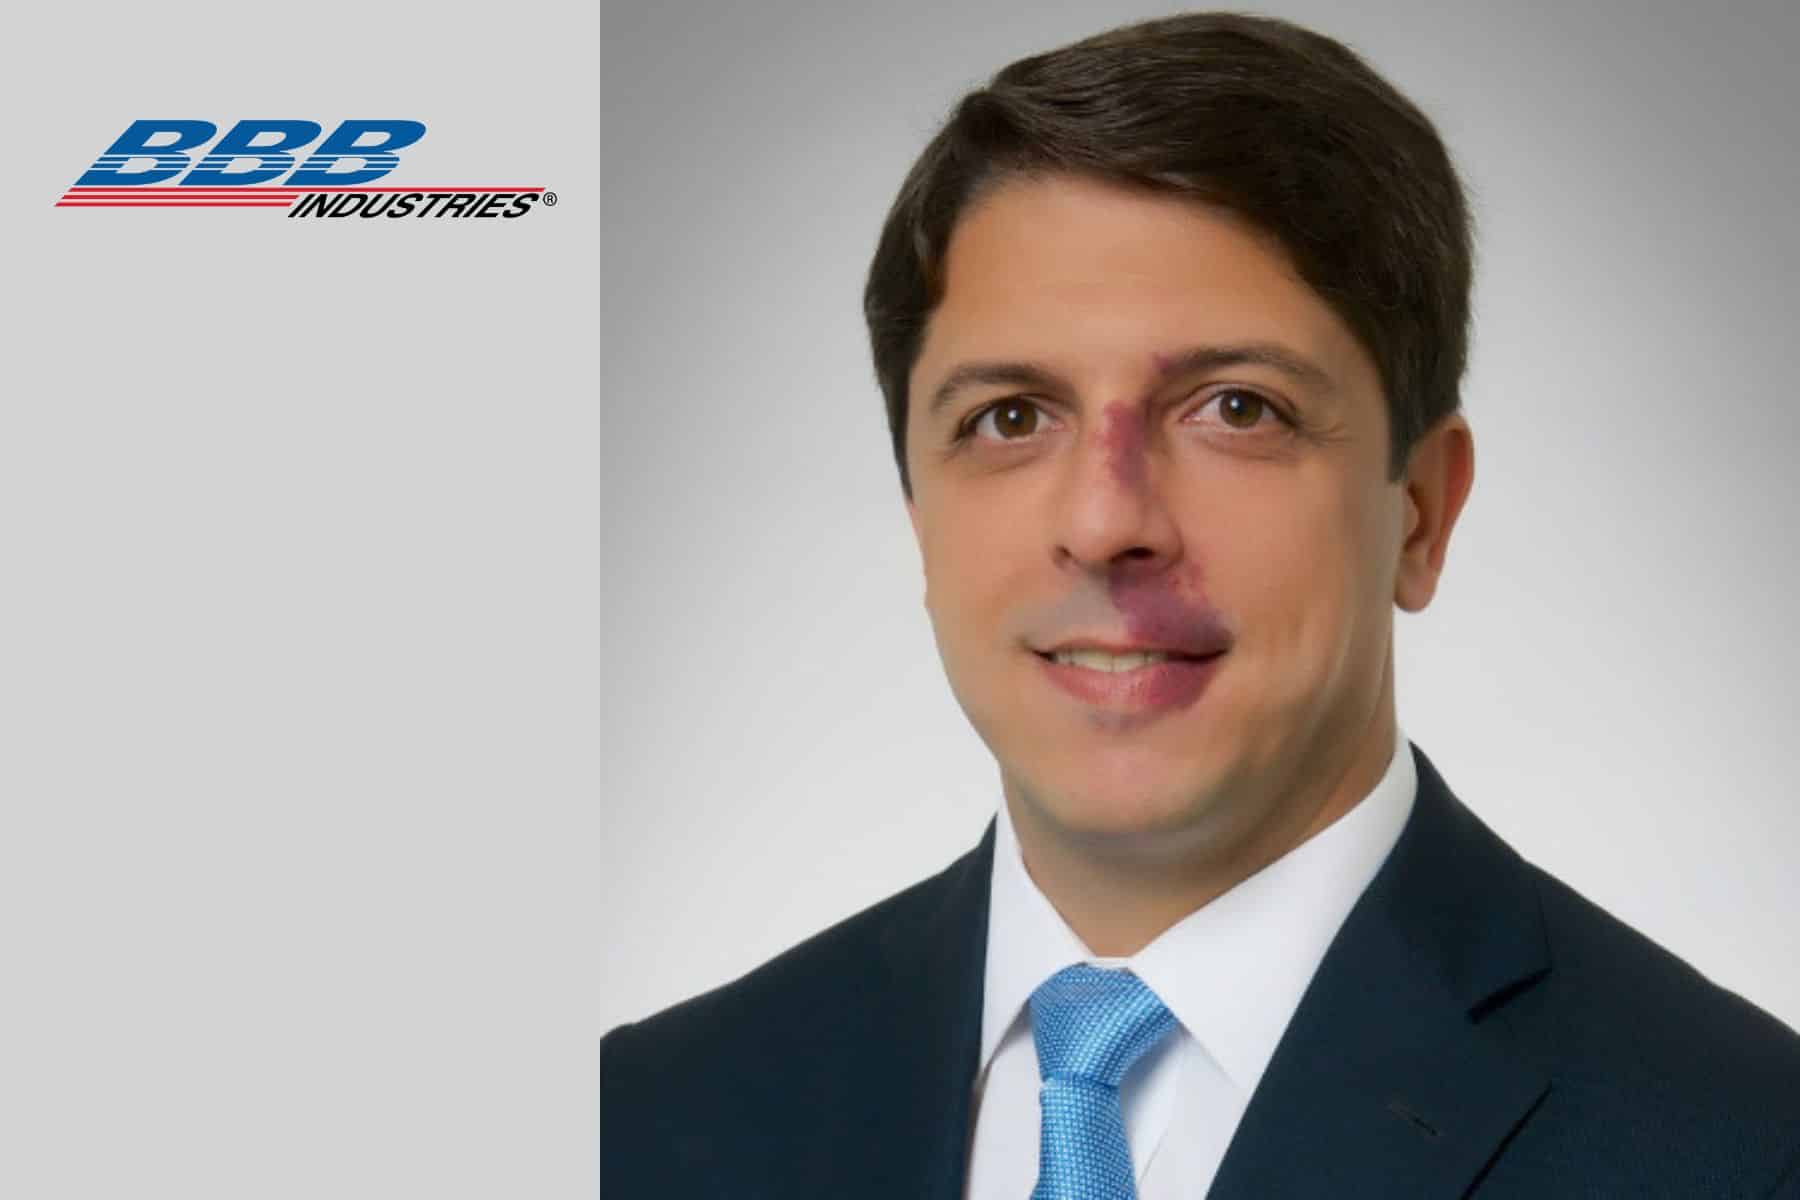 BBB Industries named Gonzalo Cajade as its Executive Vice President & Chief People Officer